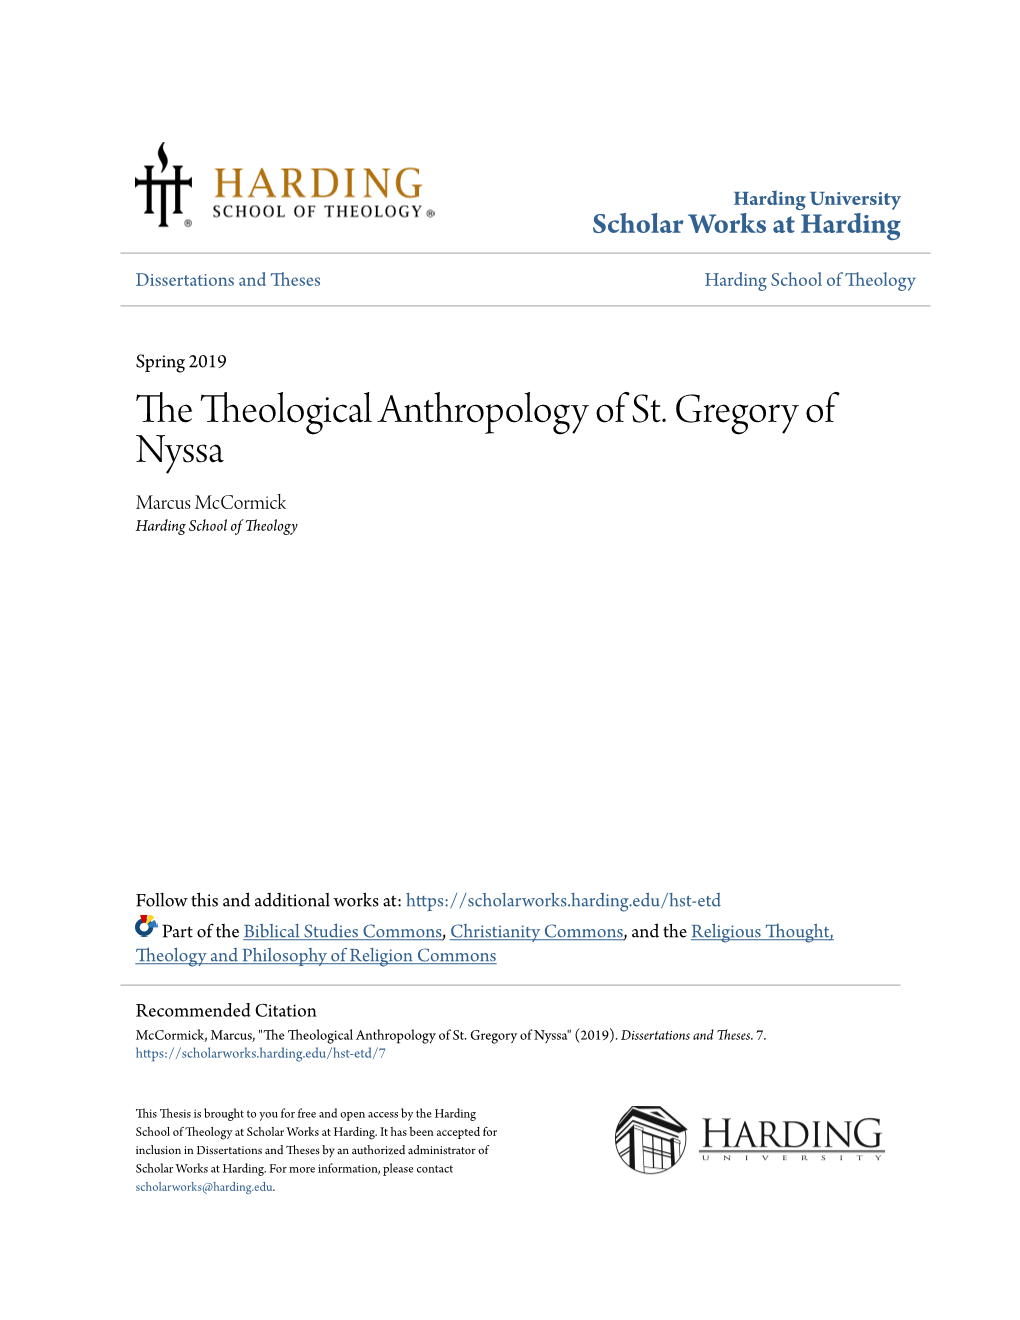 The Theological Anthropology of St. Gregory of Nyssa Marcus Mccormick Harding School of Theology